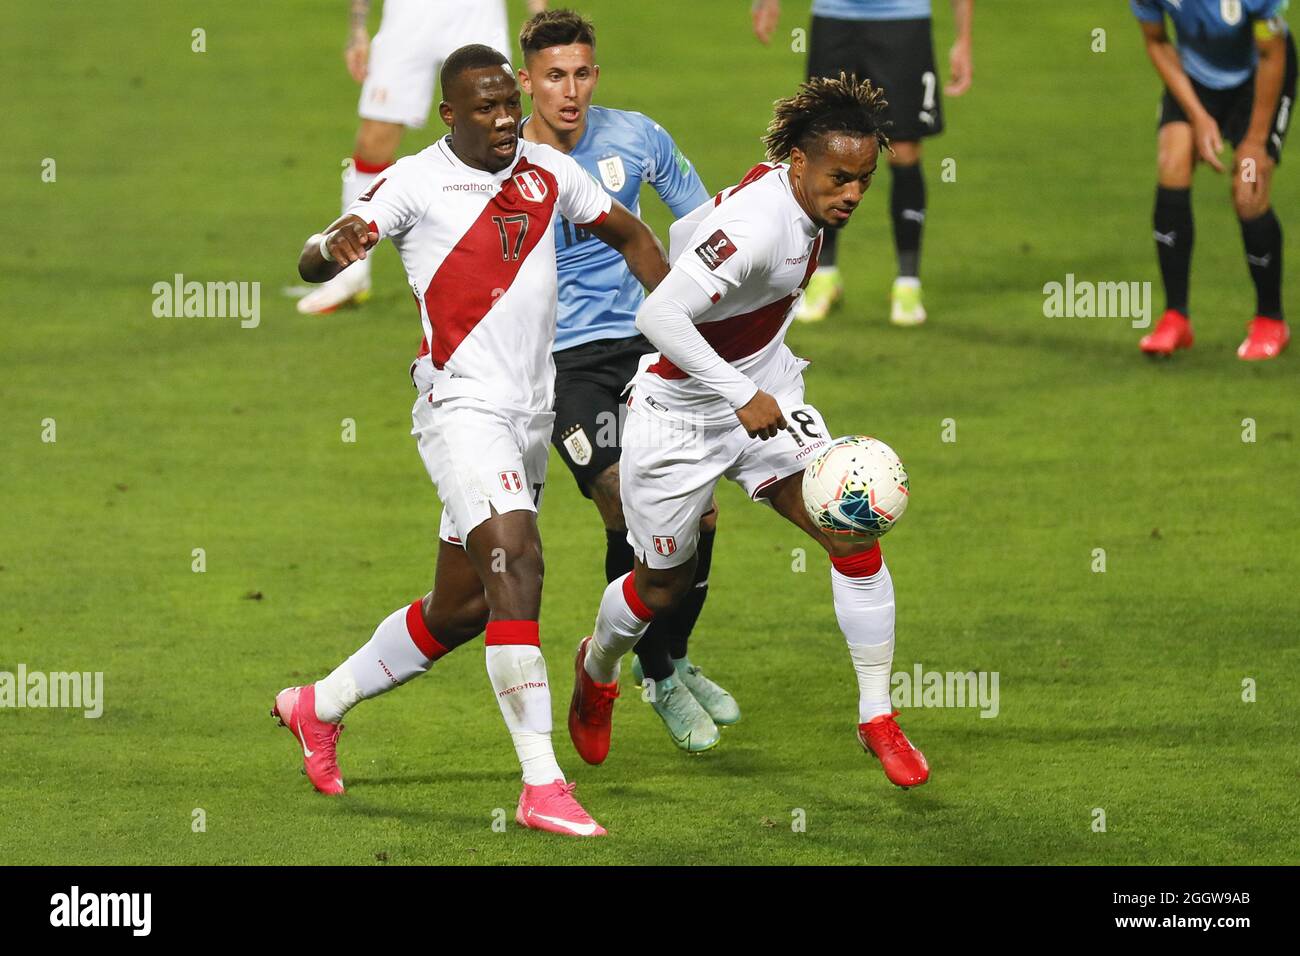 Lima, Peru. 02nd Sep, 2021. Luis Advicula e Andre Carrillo during the 2022 Football World Cup Qualifier between Peru adn Uruguay at the Estádio Nacional del Peru in Lima, Peru. The game ended 1-1 with Tapia scoring for the hosts in the 24th minute and de Arrascaeta equalizing for Uruguay in the 29th. Credit: SPP Sport Press Photo. /Alamy Live News Stock Photo